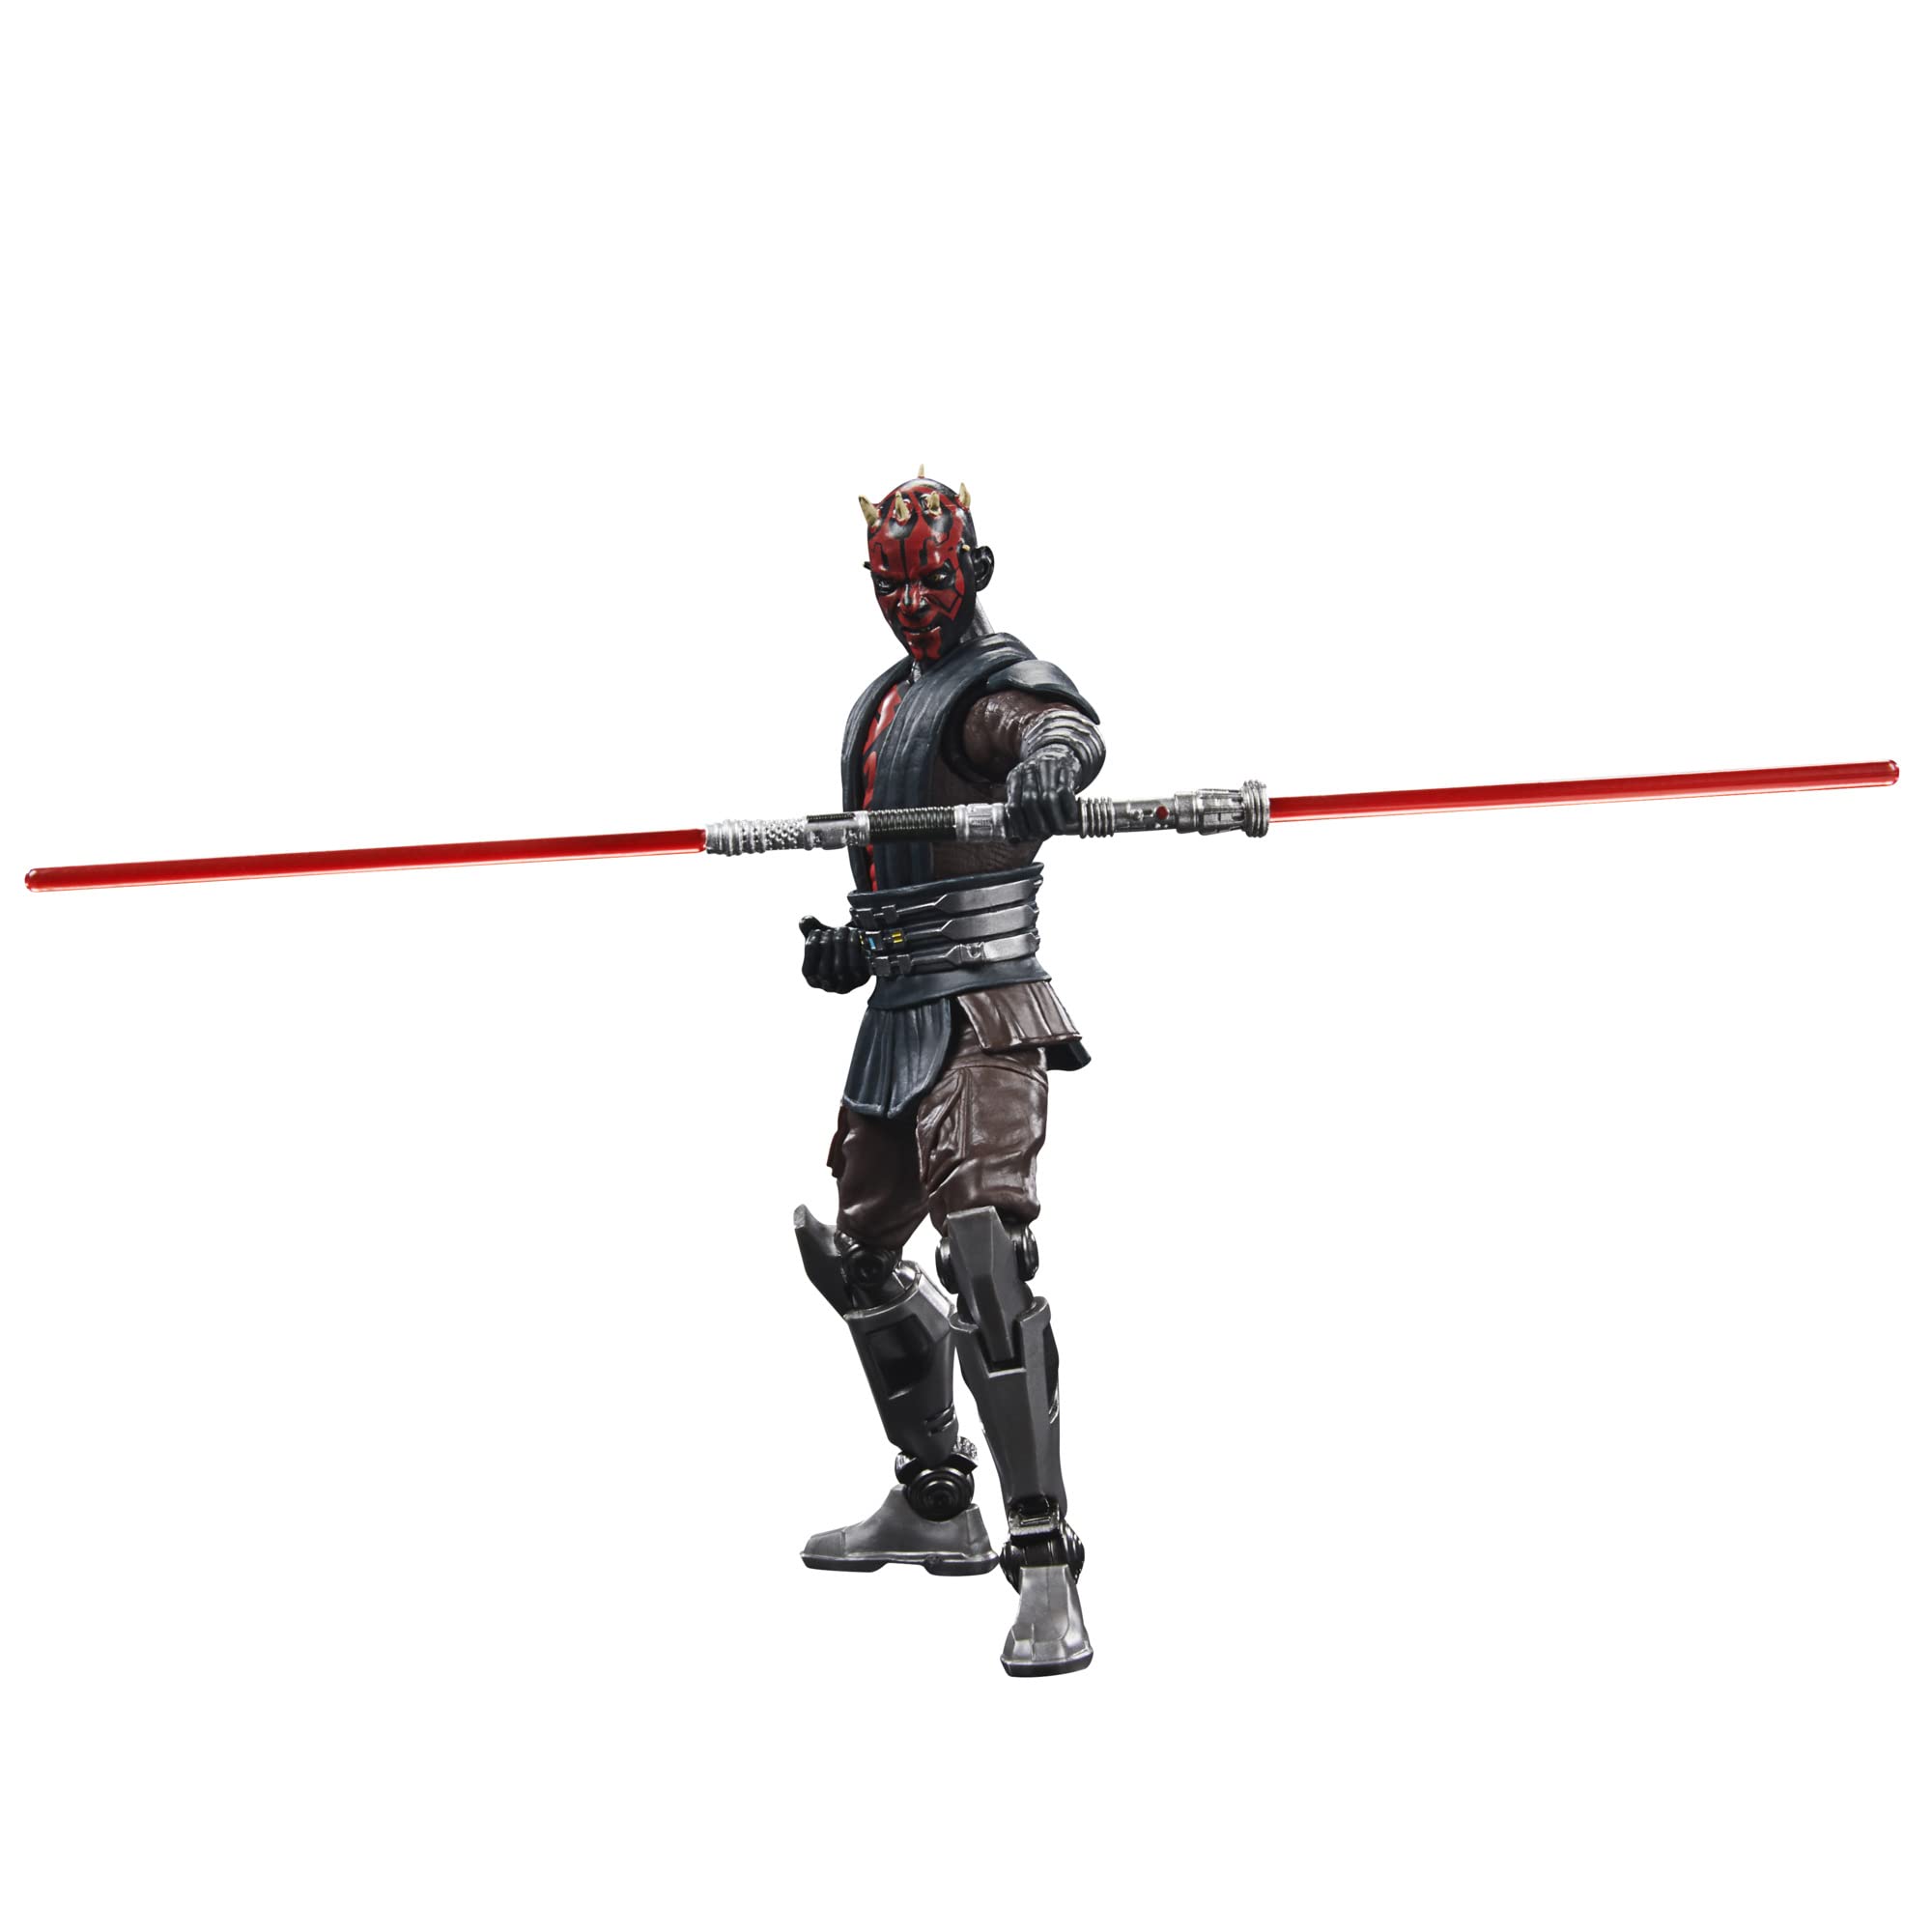 STAR WARS The Black Series Darth Maul Toy 6-Inch-Scale The Clone Wars Collectible Action Figure, Toys for Kids Ages 4 and Up